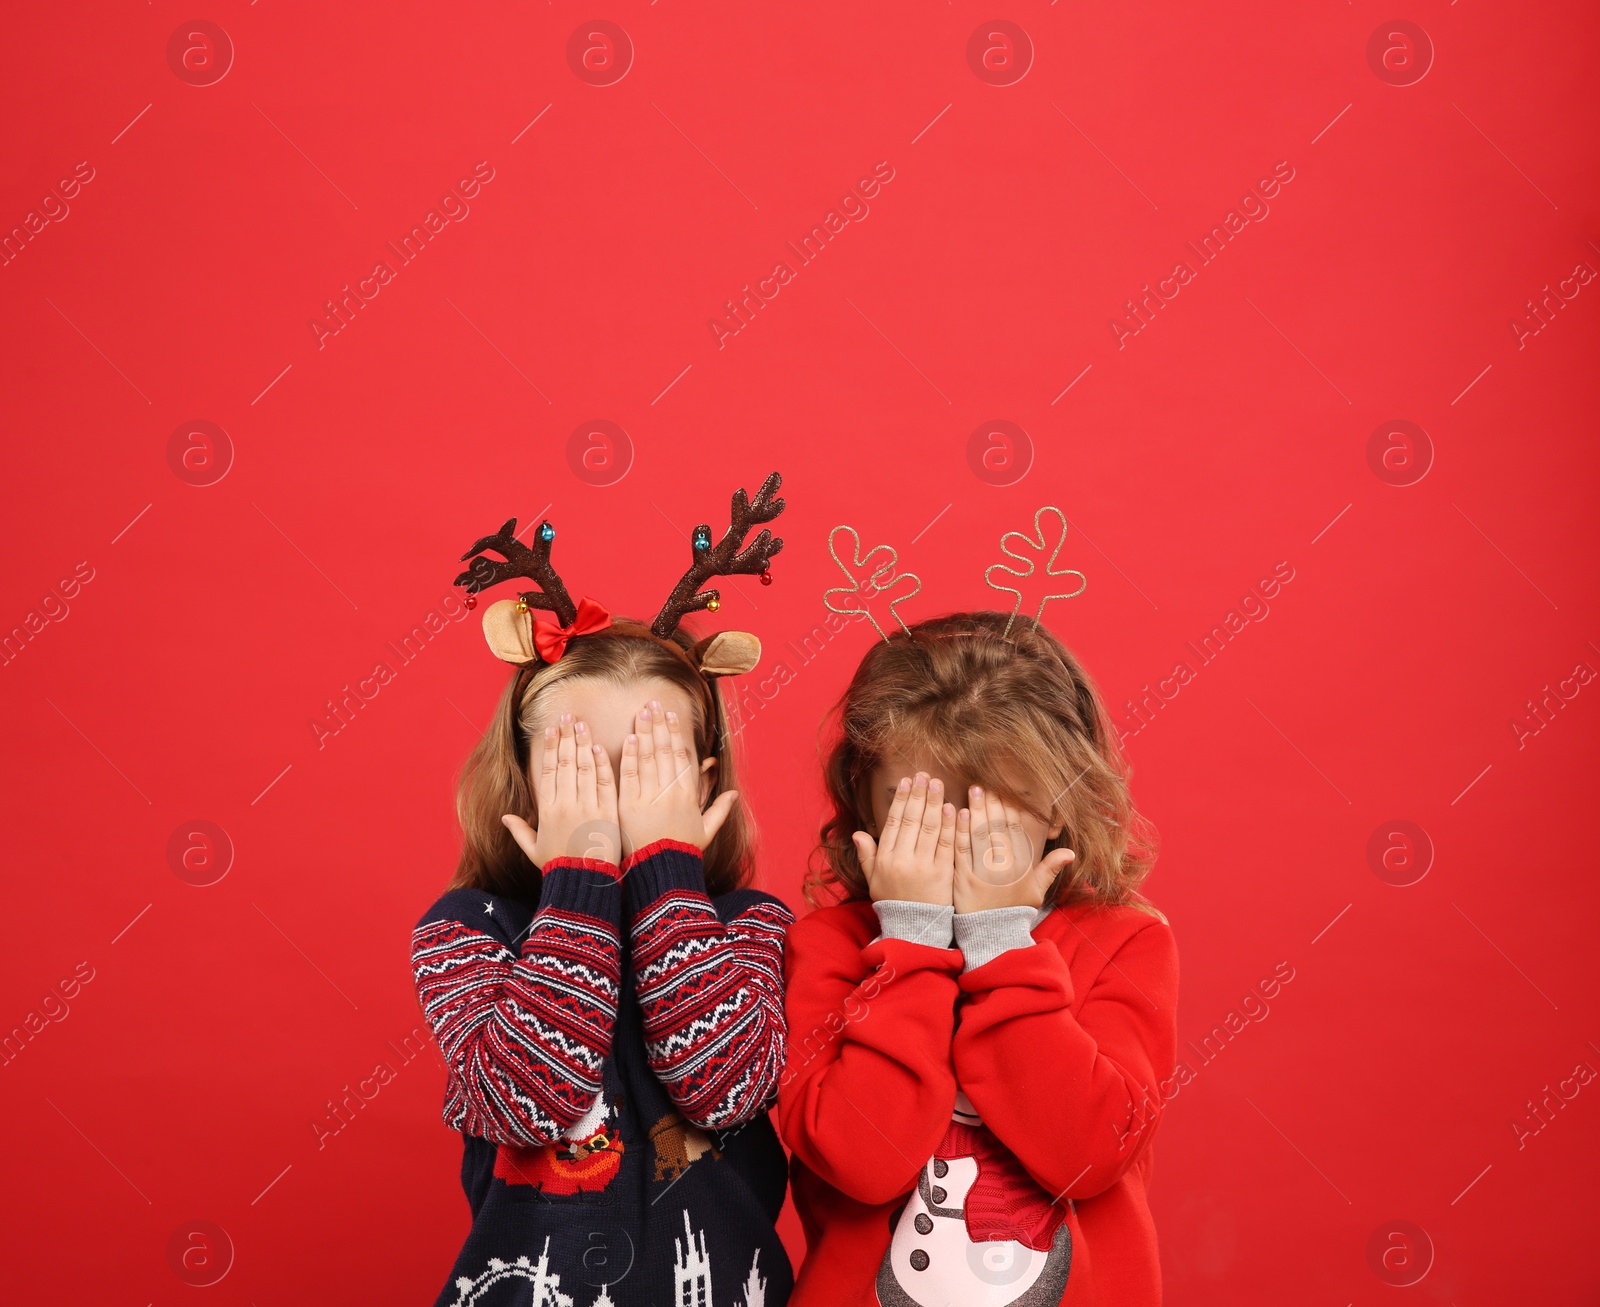 Photo of Kids in Christmas sweaters and festive headbands hiding faces on red background